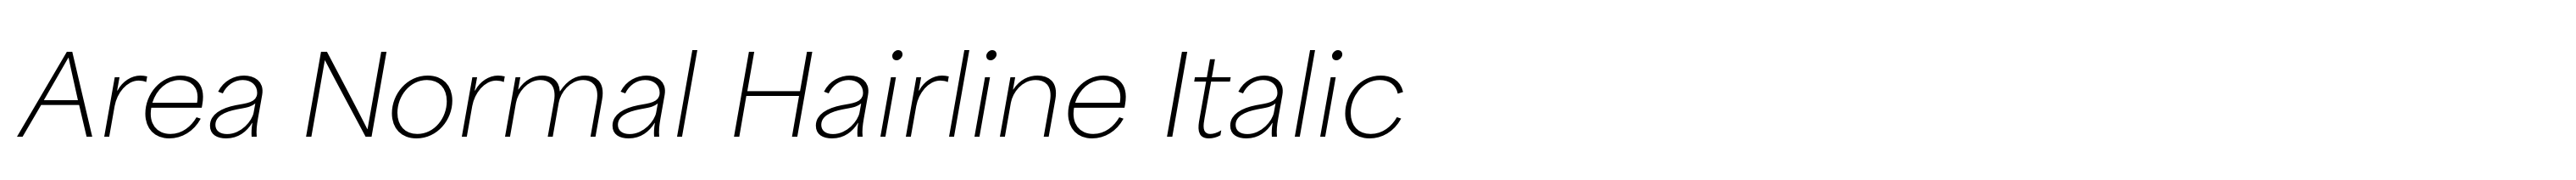 Area Normal Hairline Italic